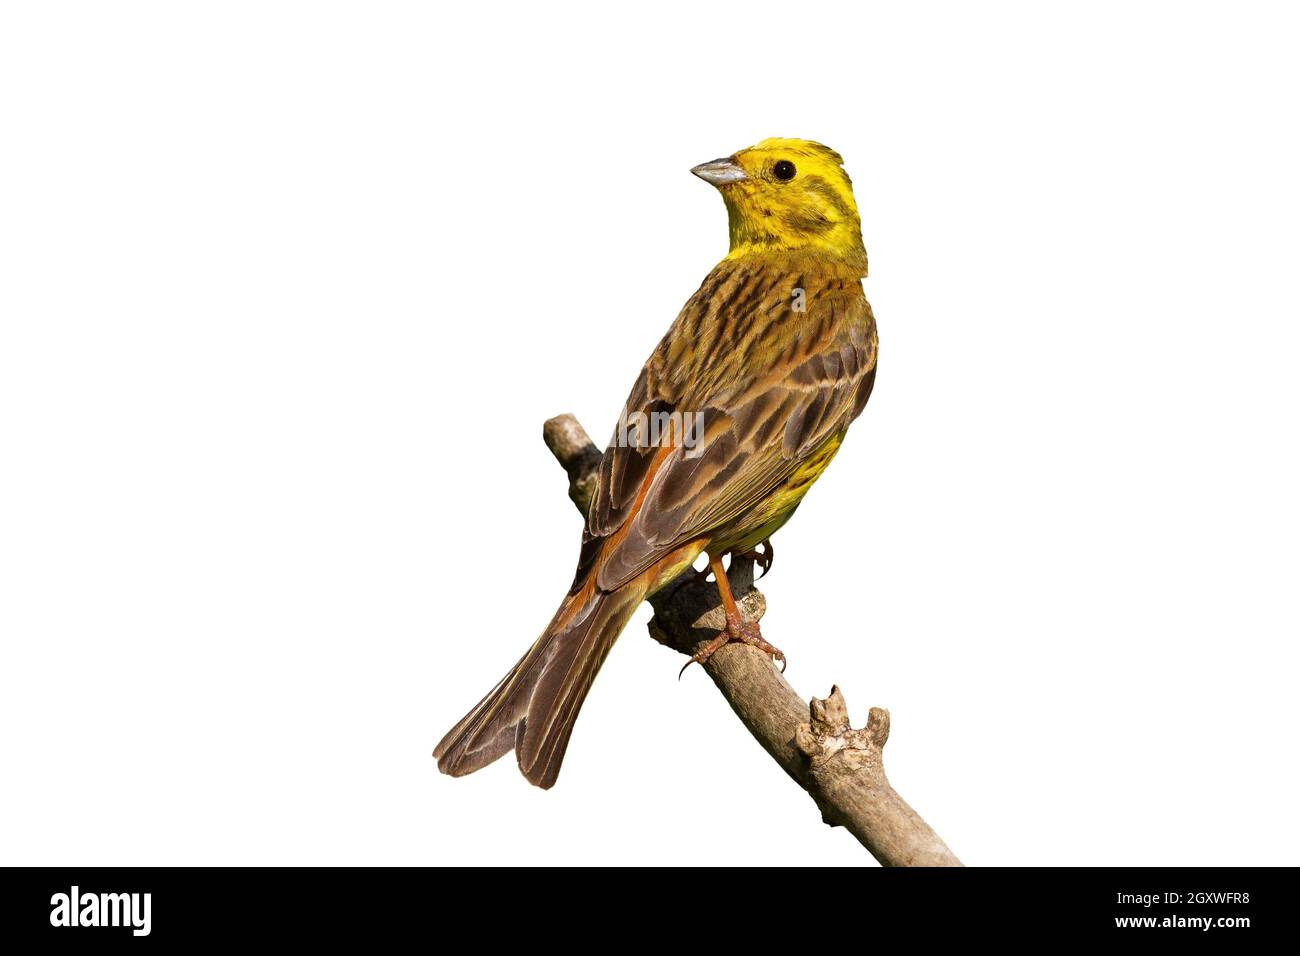 Yellowhammer, emberiza citrinella, sitting on branch in summer with copy space. Yellow bird observing on wood isolated on white background. Feathered Stock Photo